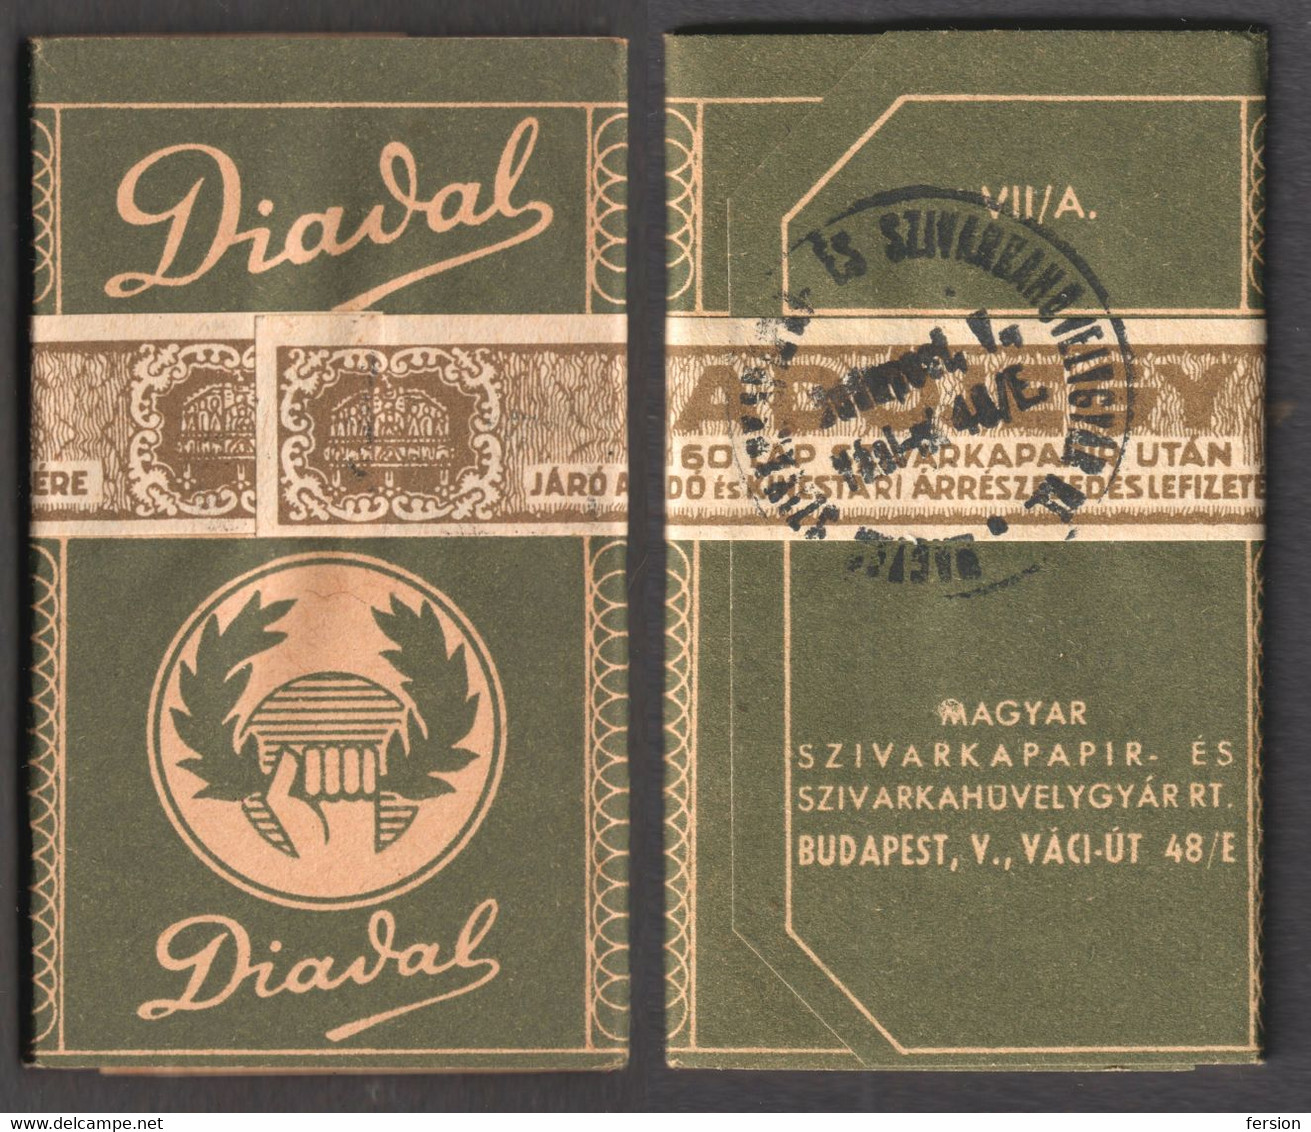 REVENUE Seal Fiscal Tax Stripe Hungary CIGARETTE TOBACCO Paper Package LABEL Cover DIADAL VICTORY 1930 UNUSED Full Paper - Revenue Stamps